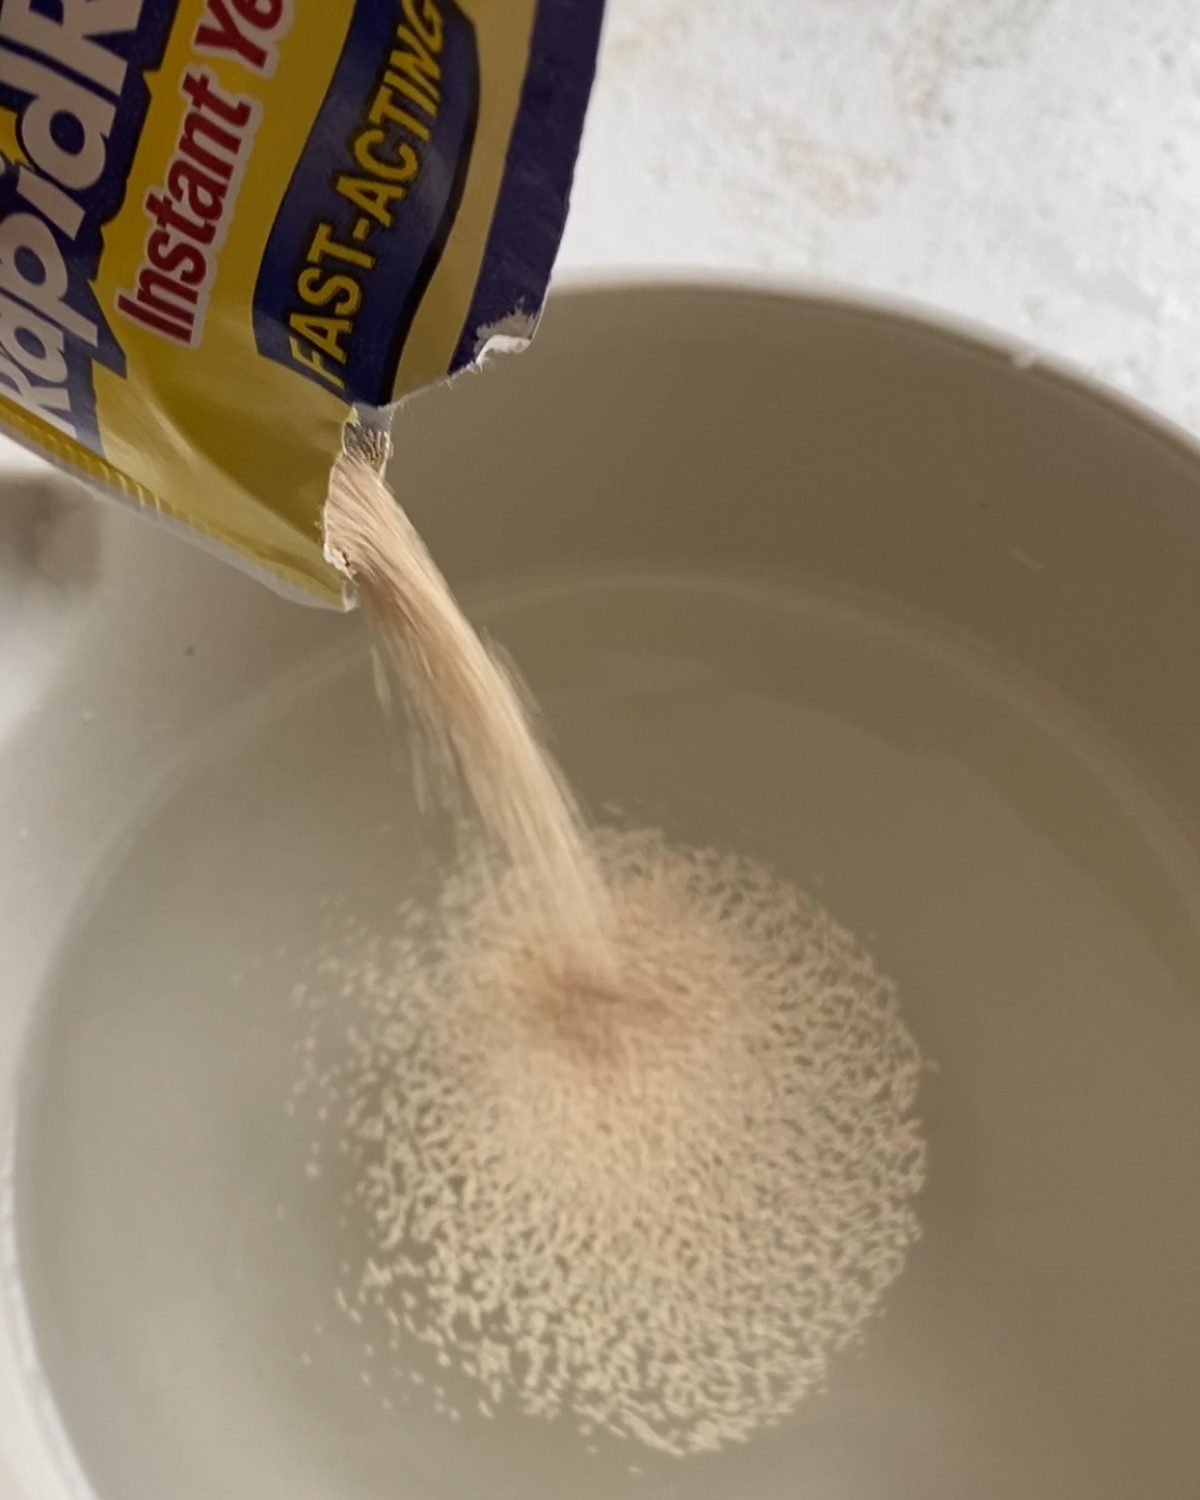 process of pouring yeast into a bowl of water